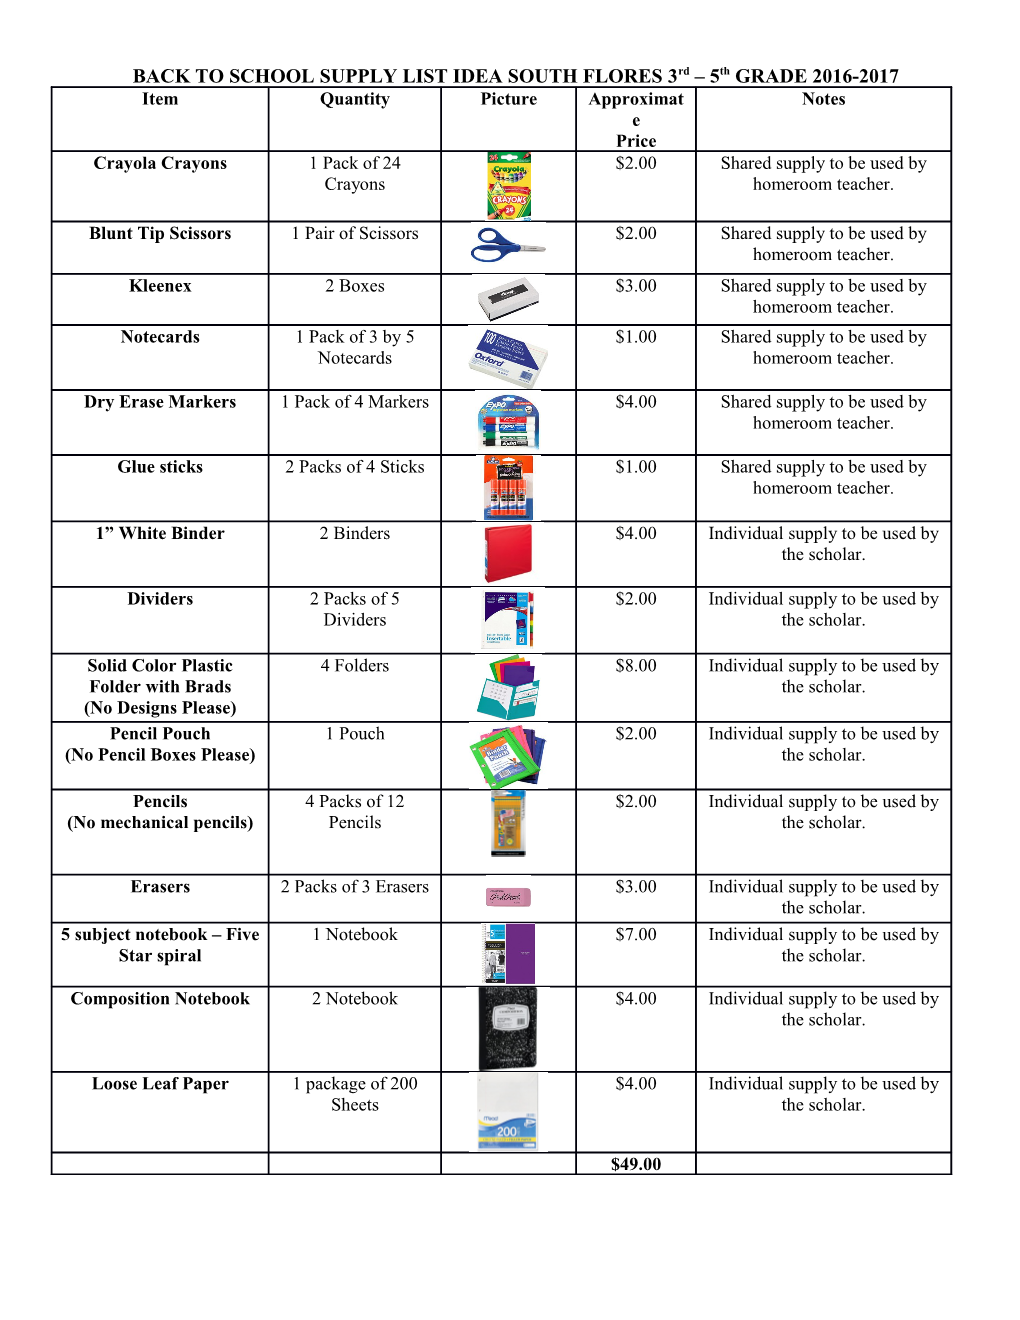 BACK to SCHOOL SUPPLY LIST IDEA SOUTH FLORES 3Rd 5Th GRADE 2016-2017